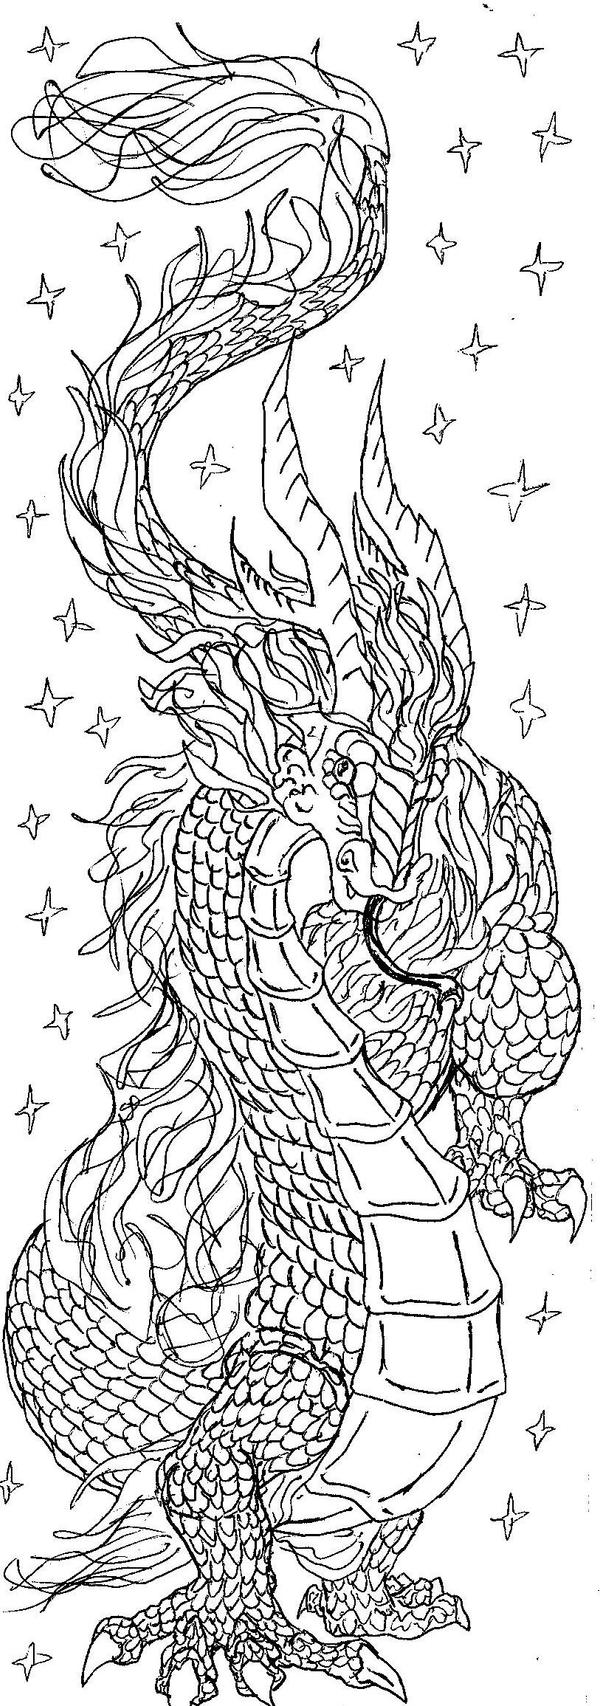 Chinese dragon doodle